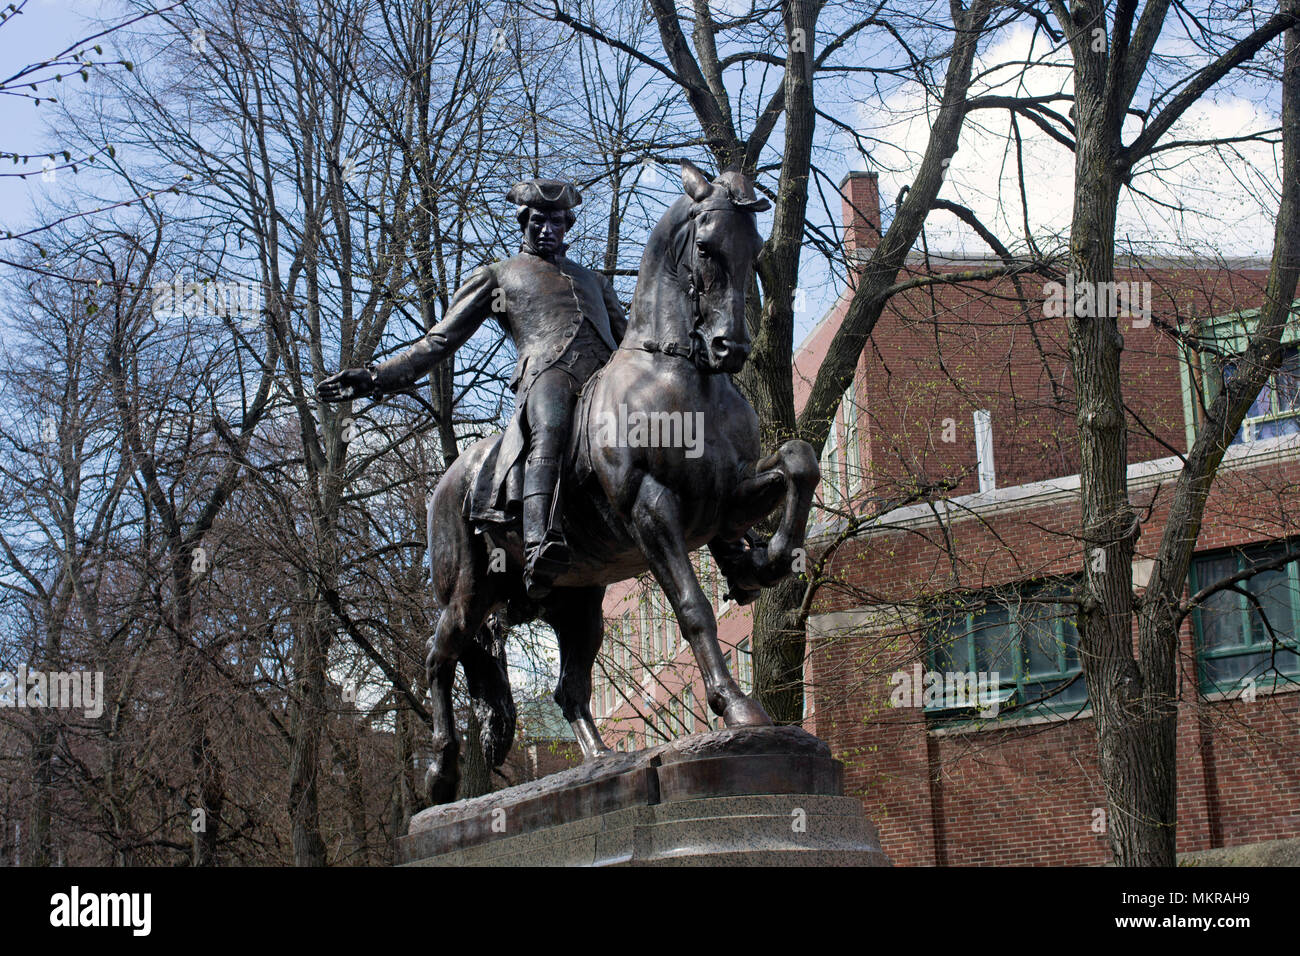 A statue of Paul Revere in the North End of Boston, Massachusetts, USA Stock Photo